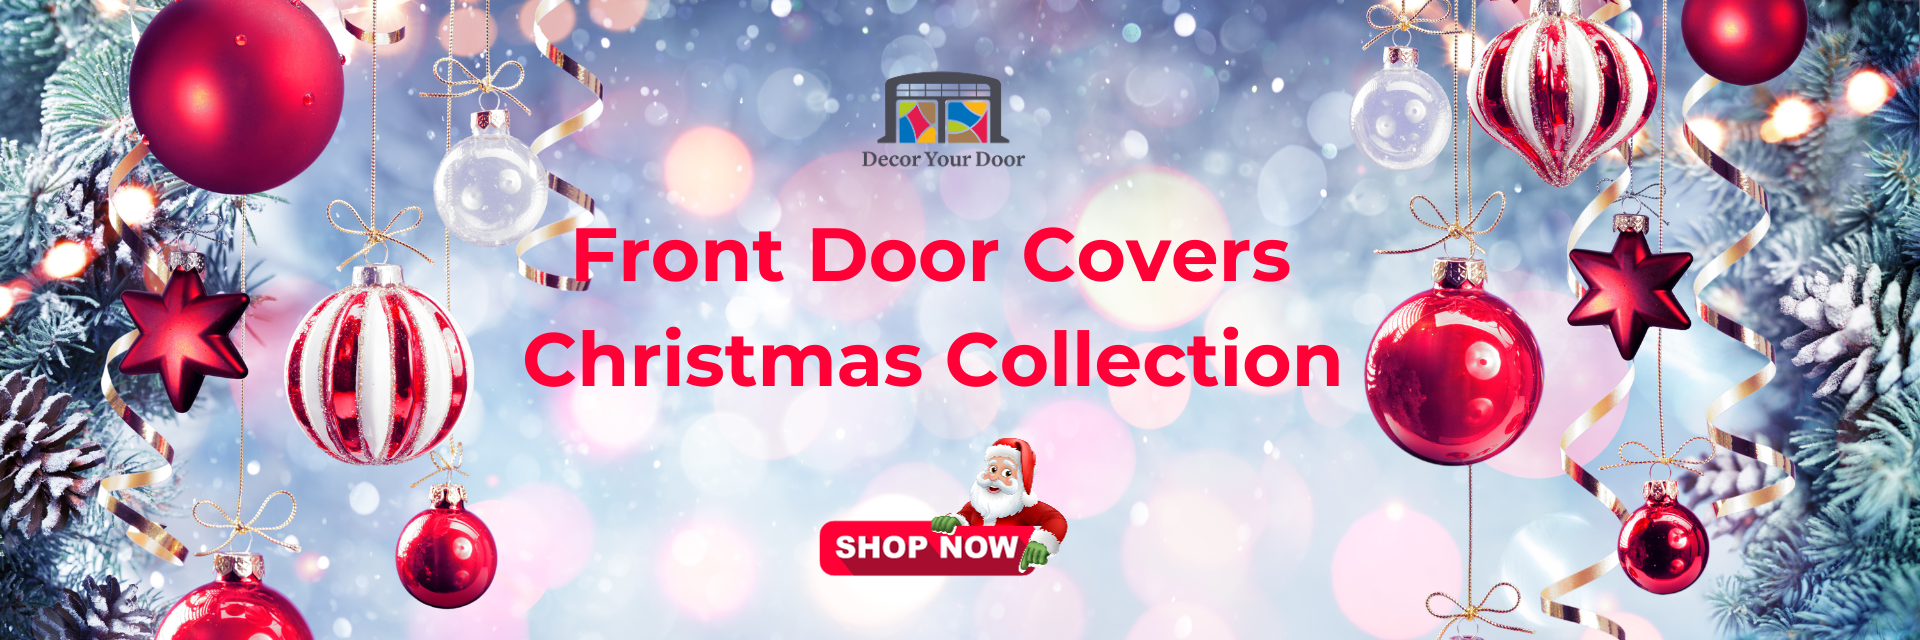 Front Door Covers Christmas Collection